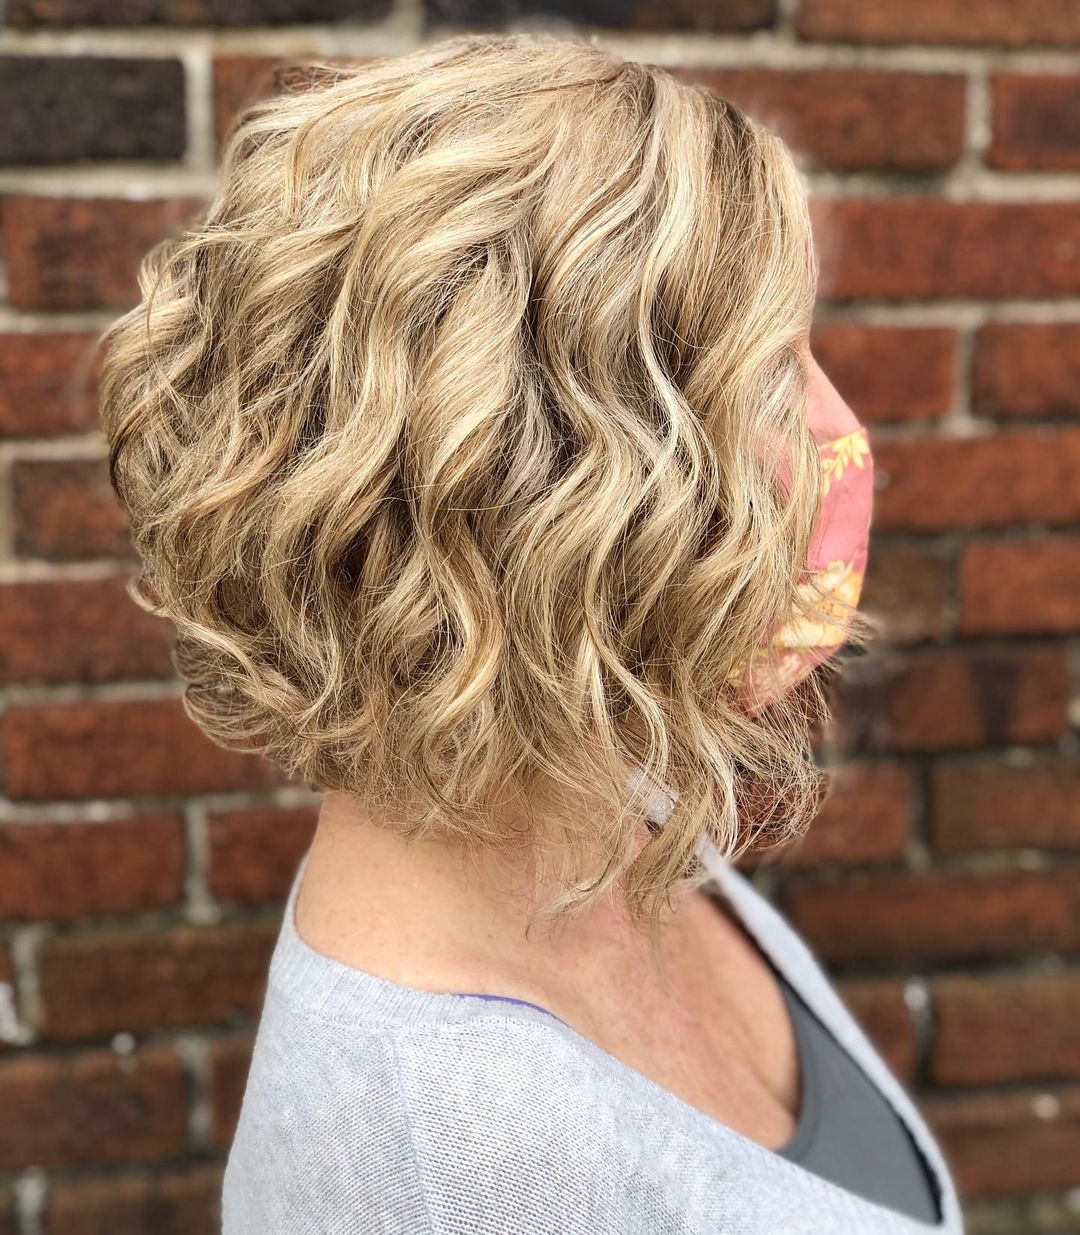 Blonde Short Curly Bob for Women Over 50